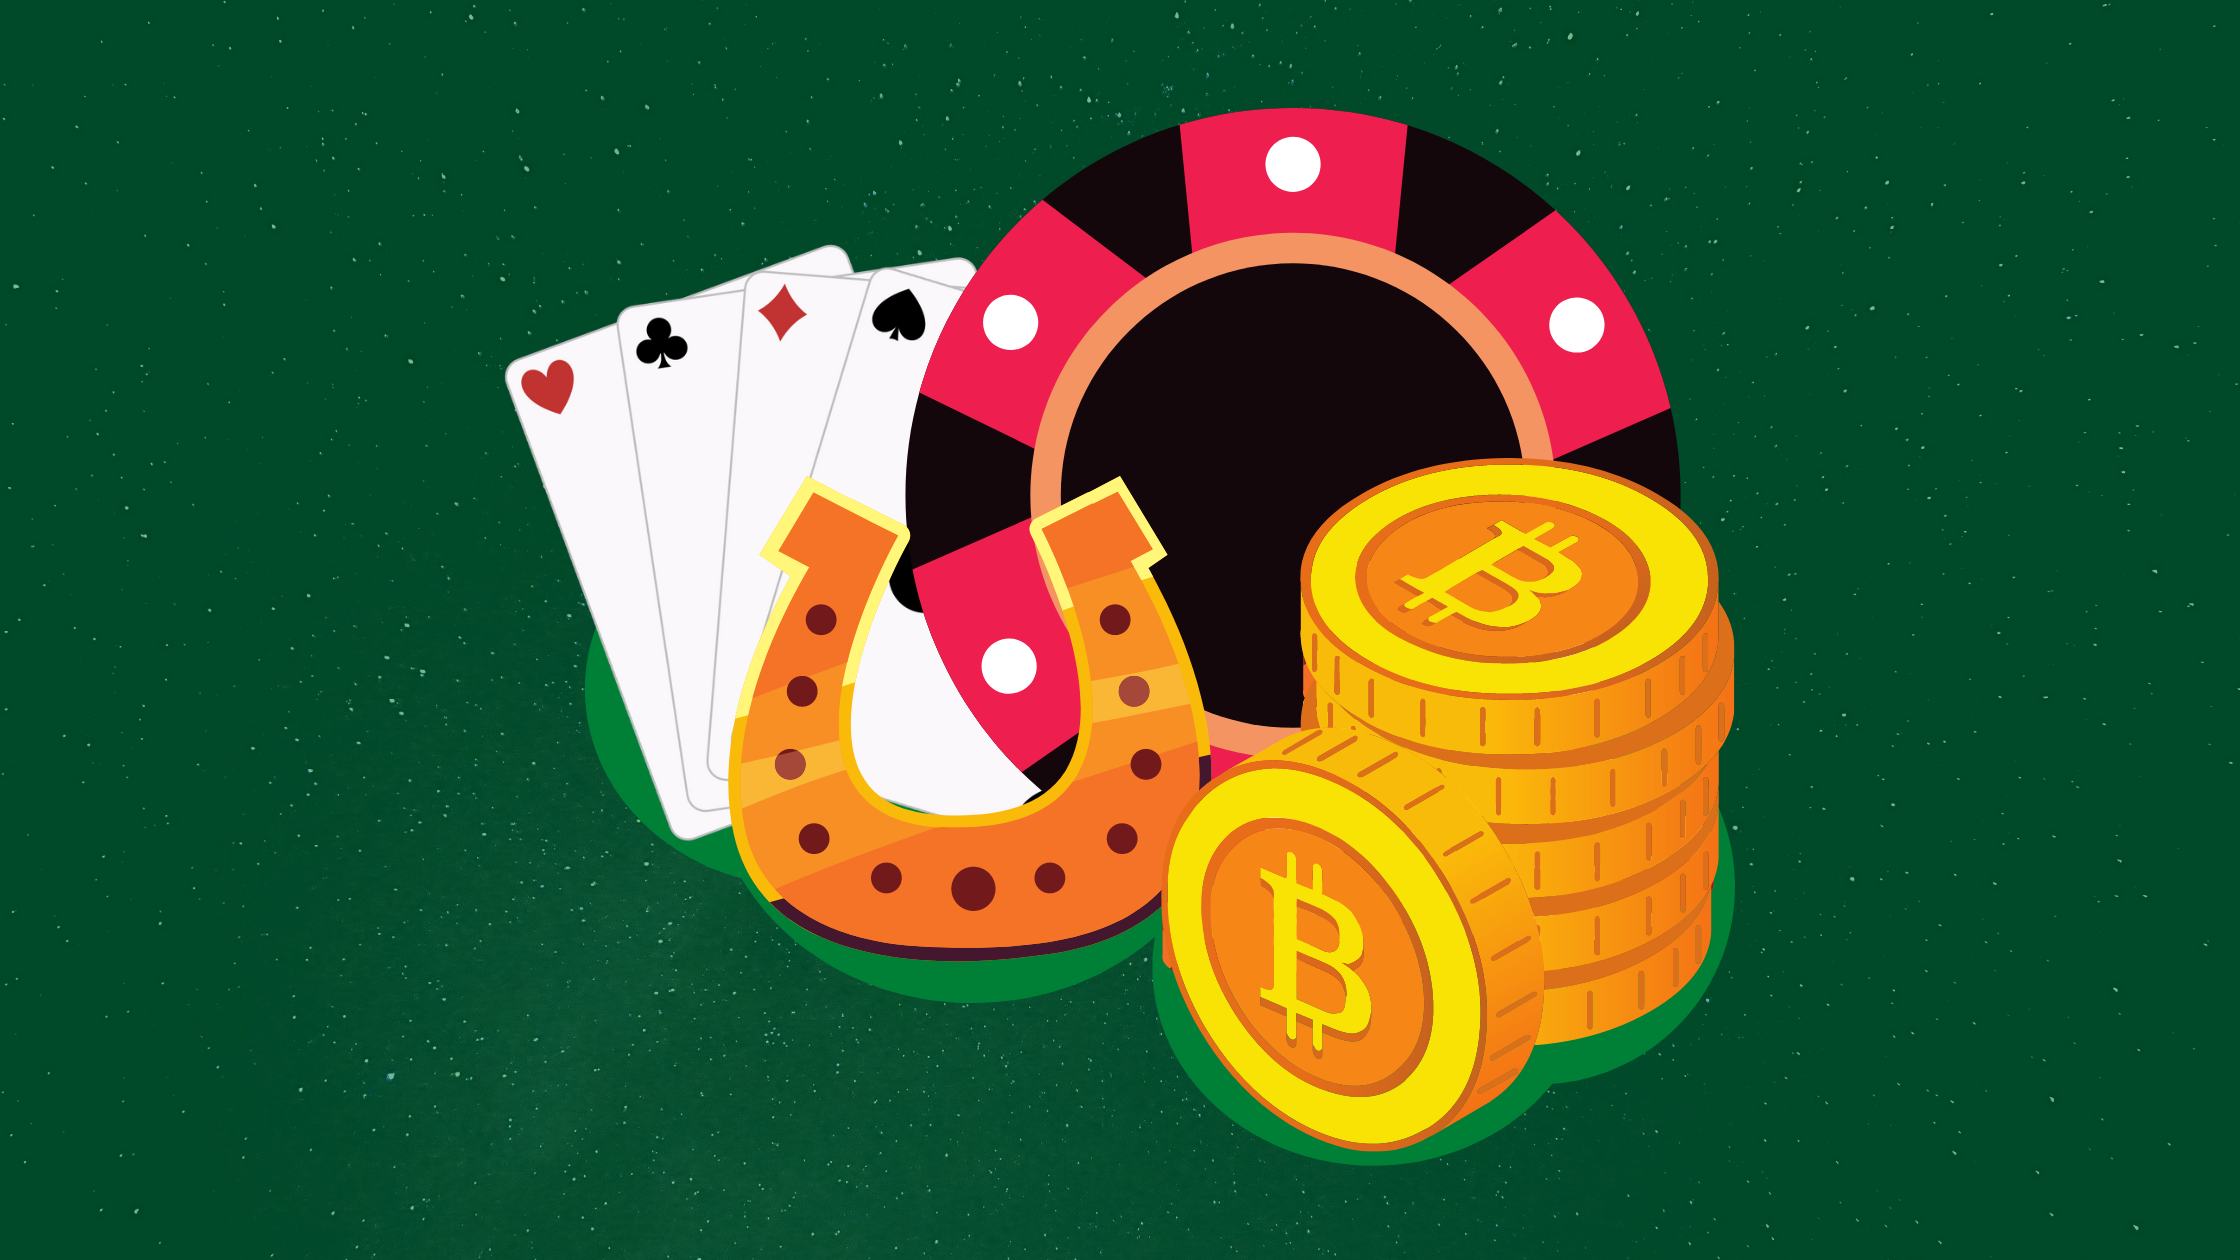 btc casinos Is Your Worst Enemy. 10 Ways To Defeat It